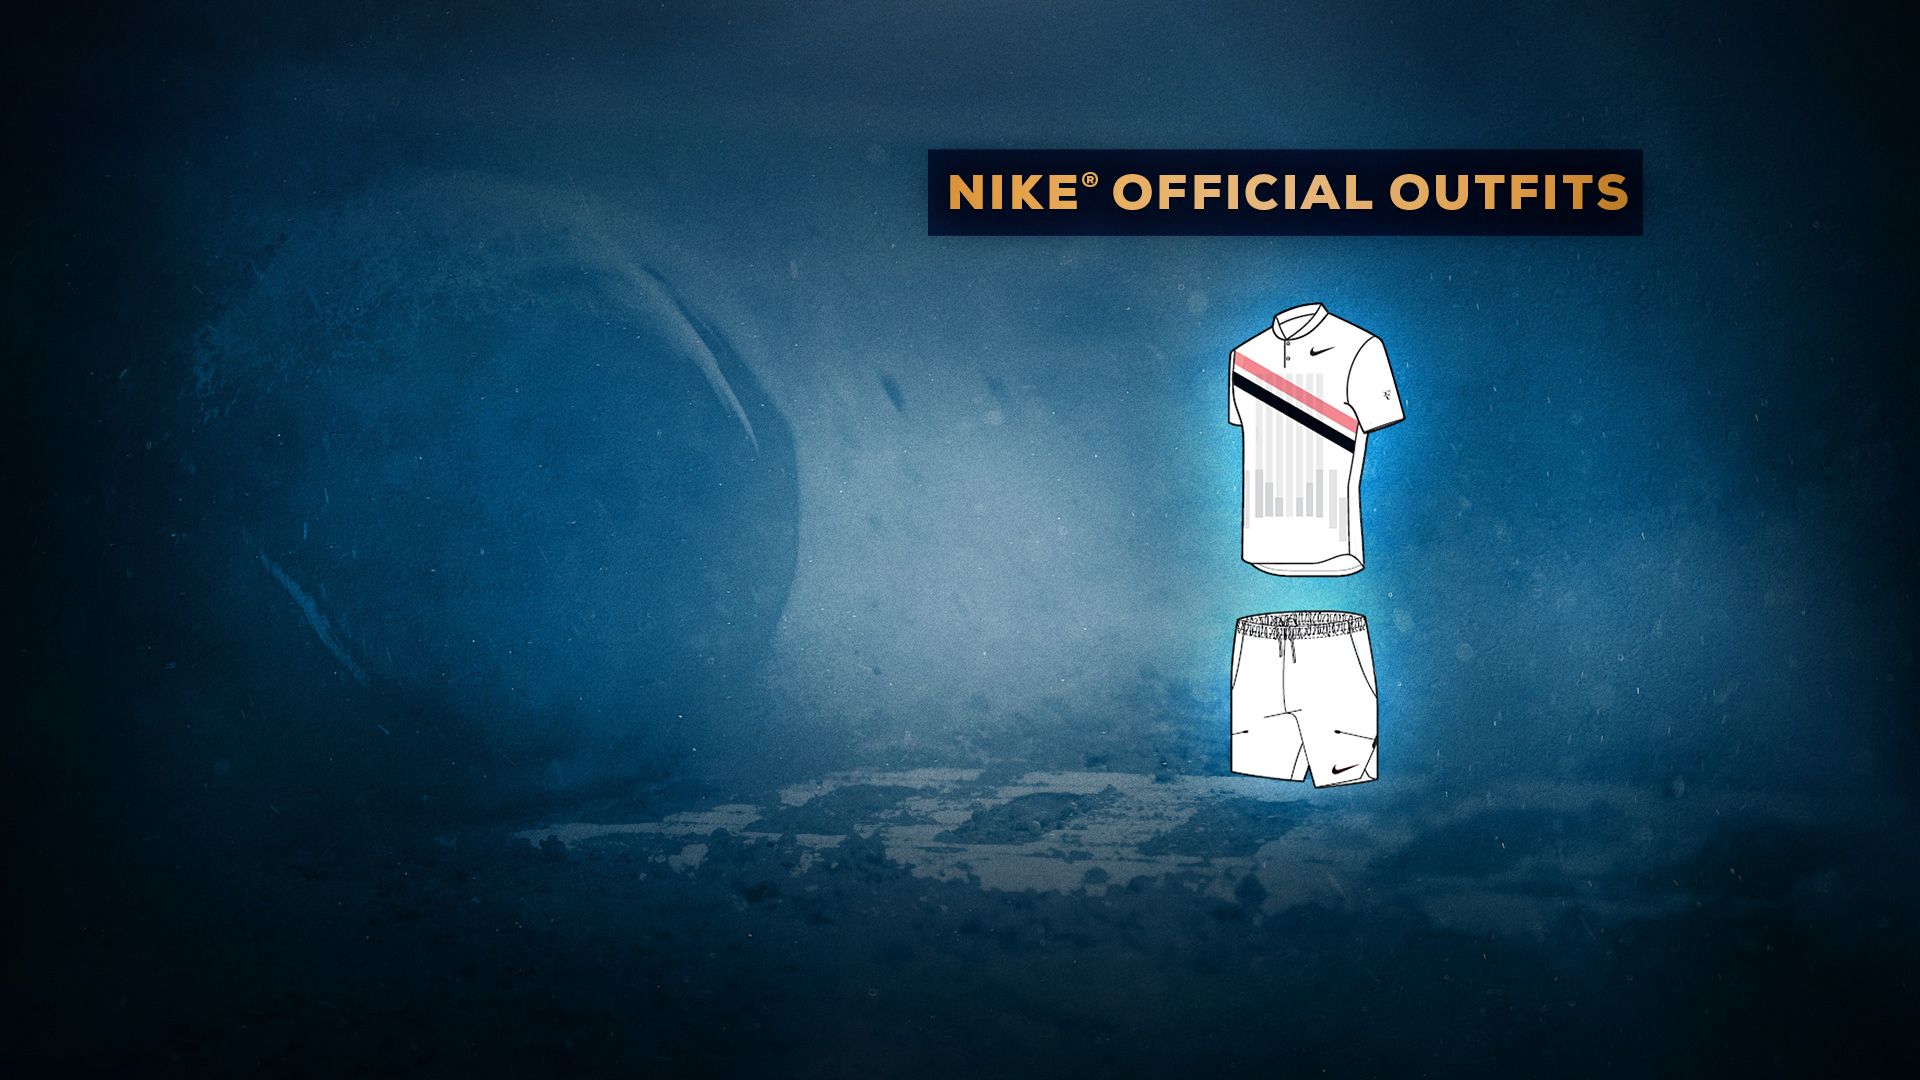 Tennis World Tour - Nike® Official Outfits